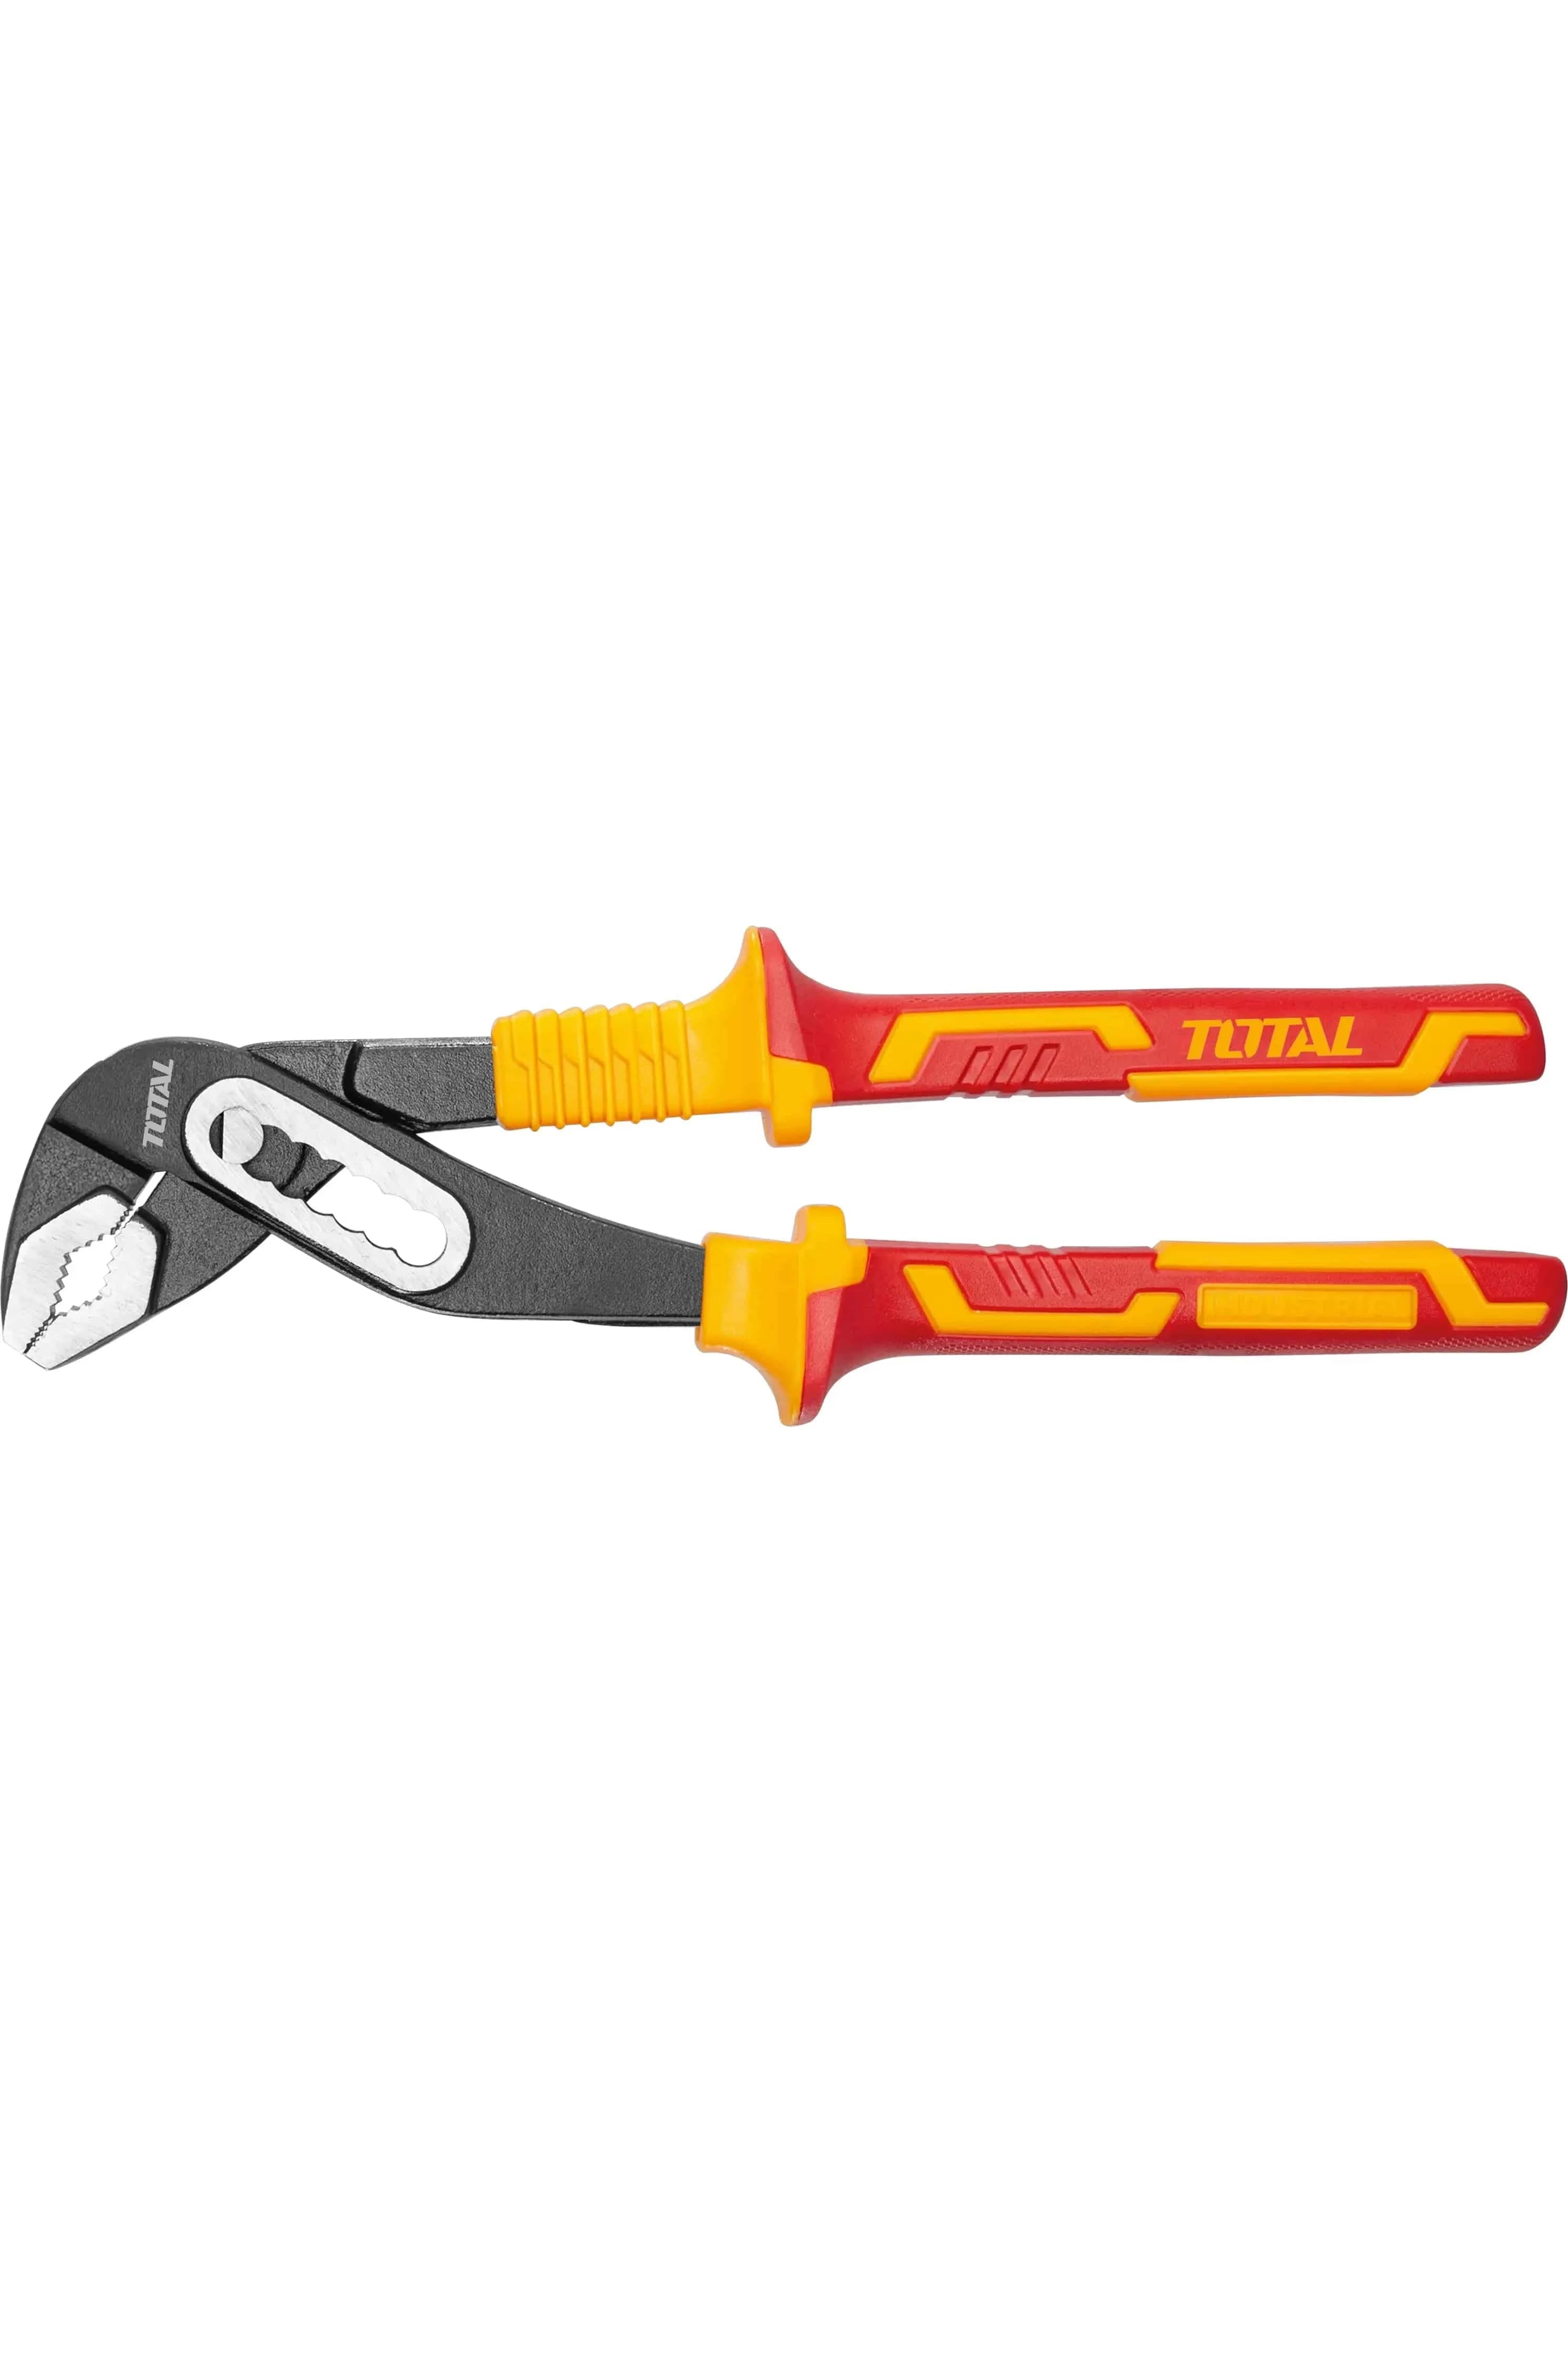 TOTAL INSULATED PUMP PLIERS - Elite Renewable Solutions